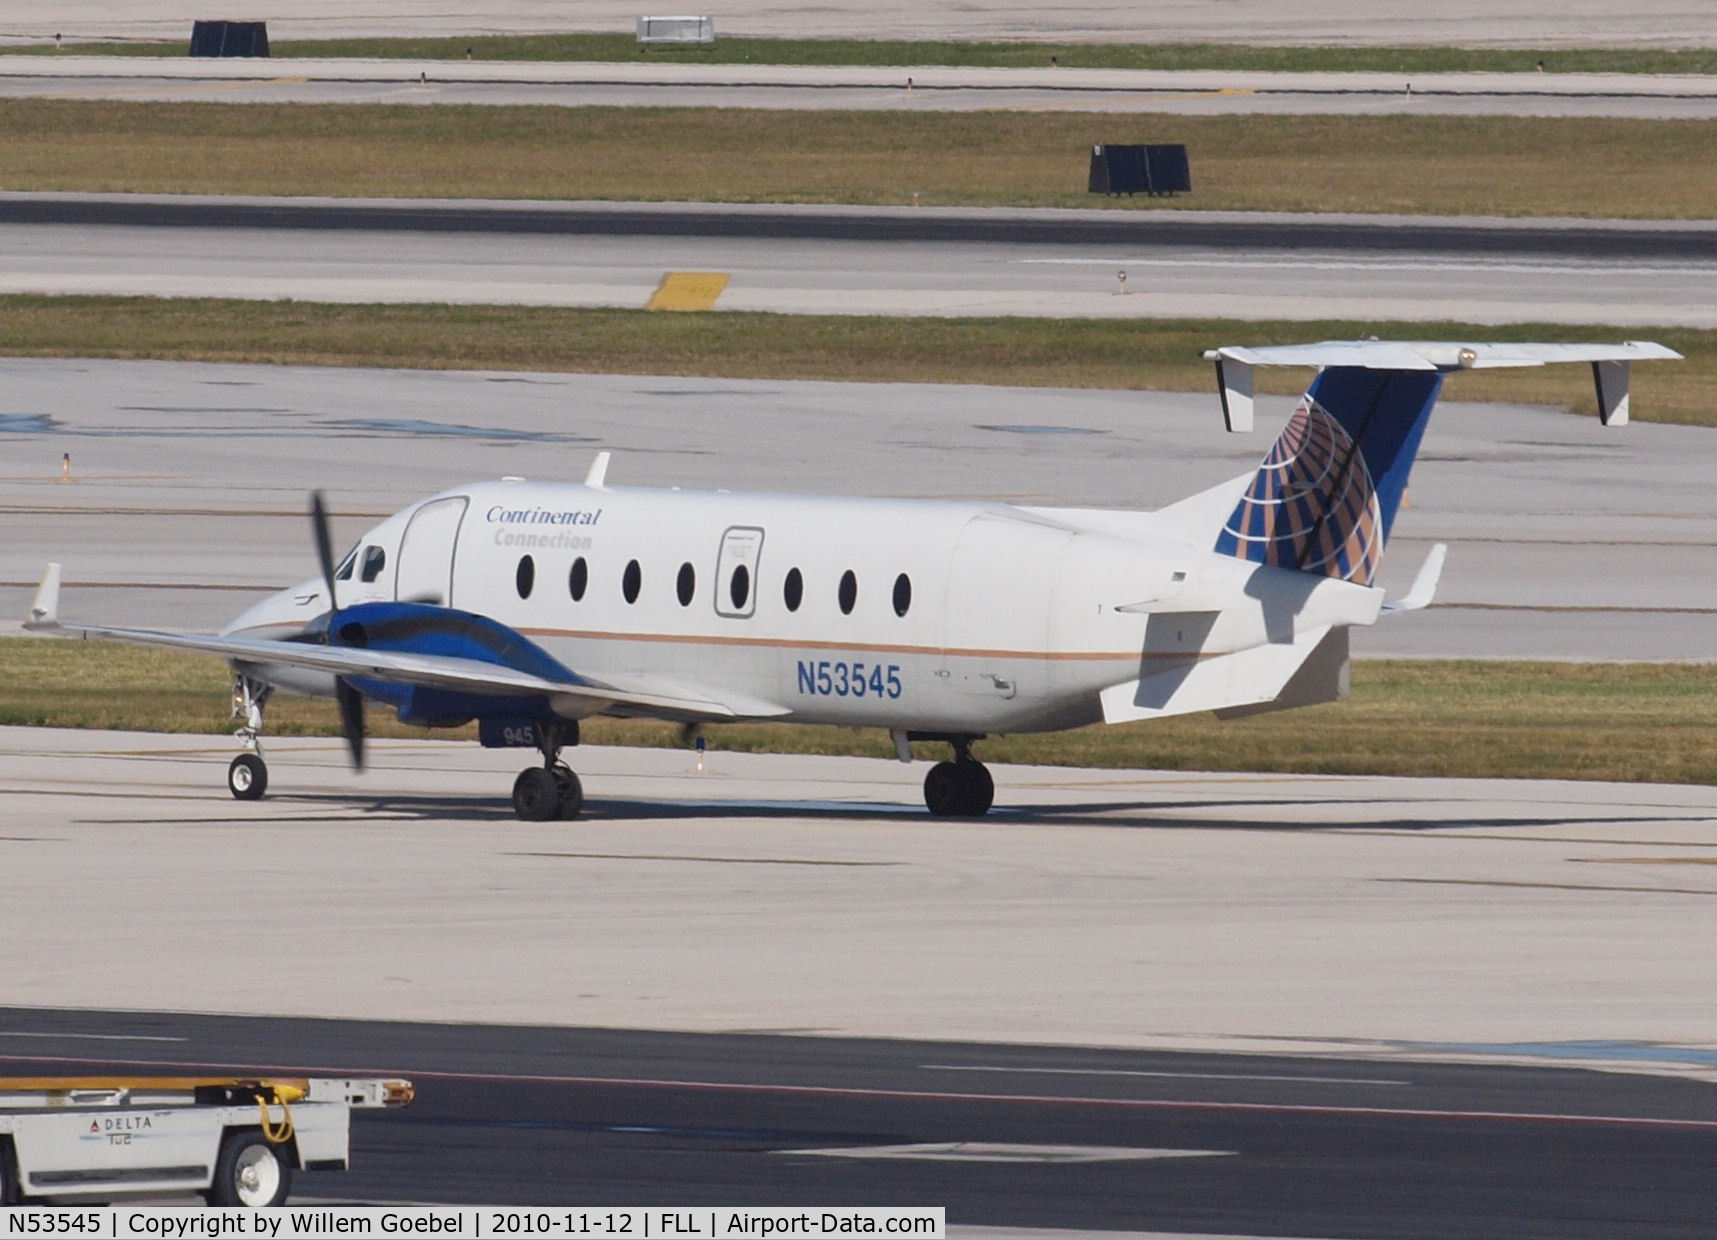 N53545, 1995 Beech 1900D C/N UE-185, Taxi for take off on Frt. Lauderdale Airport(FLL)